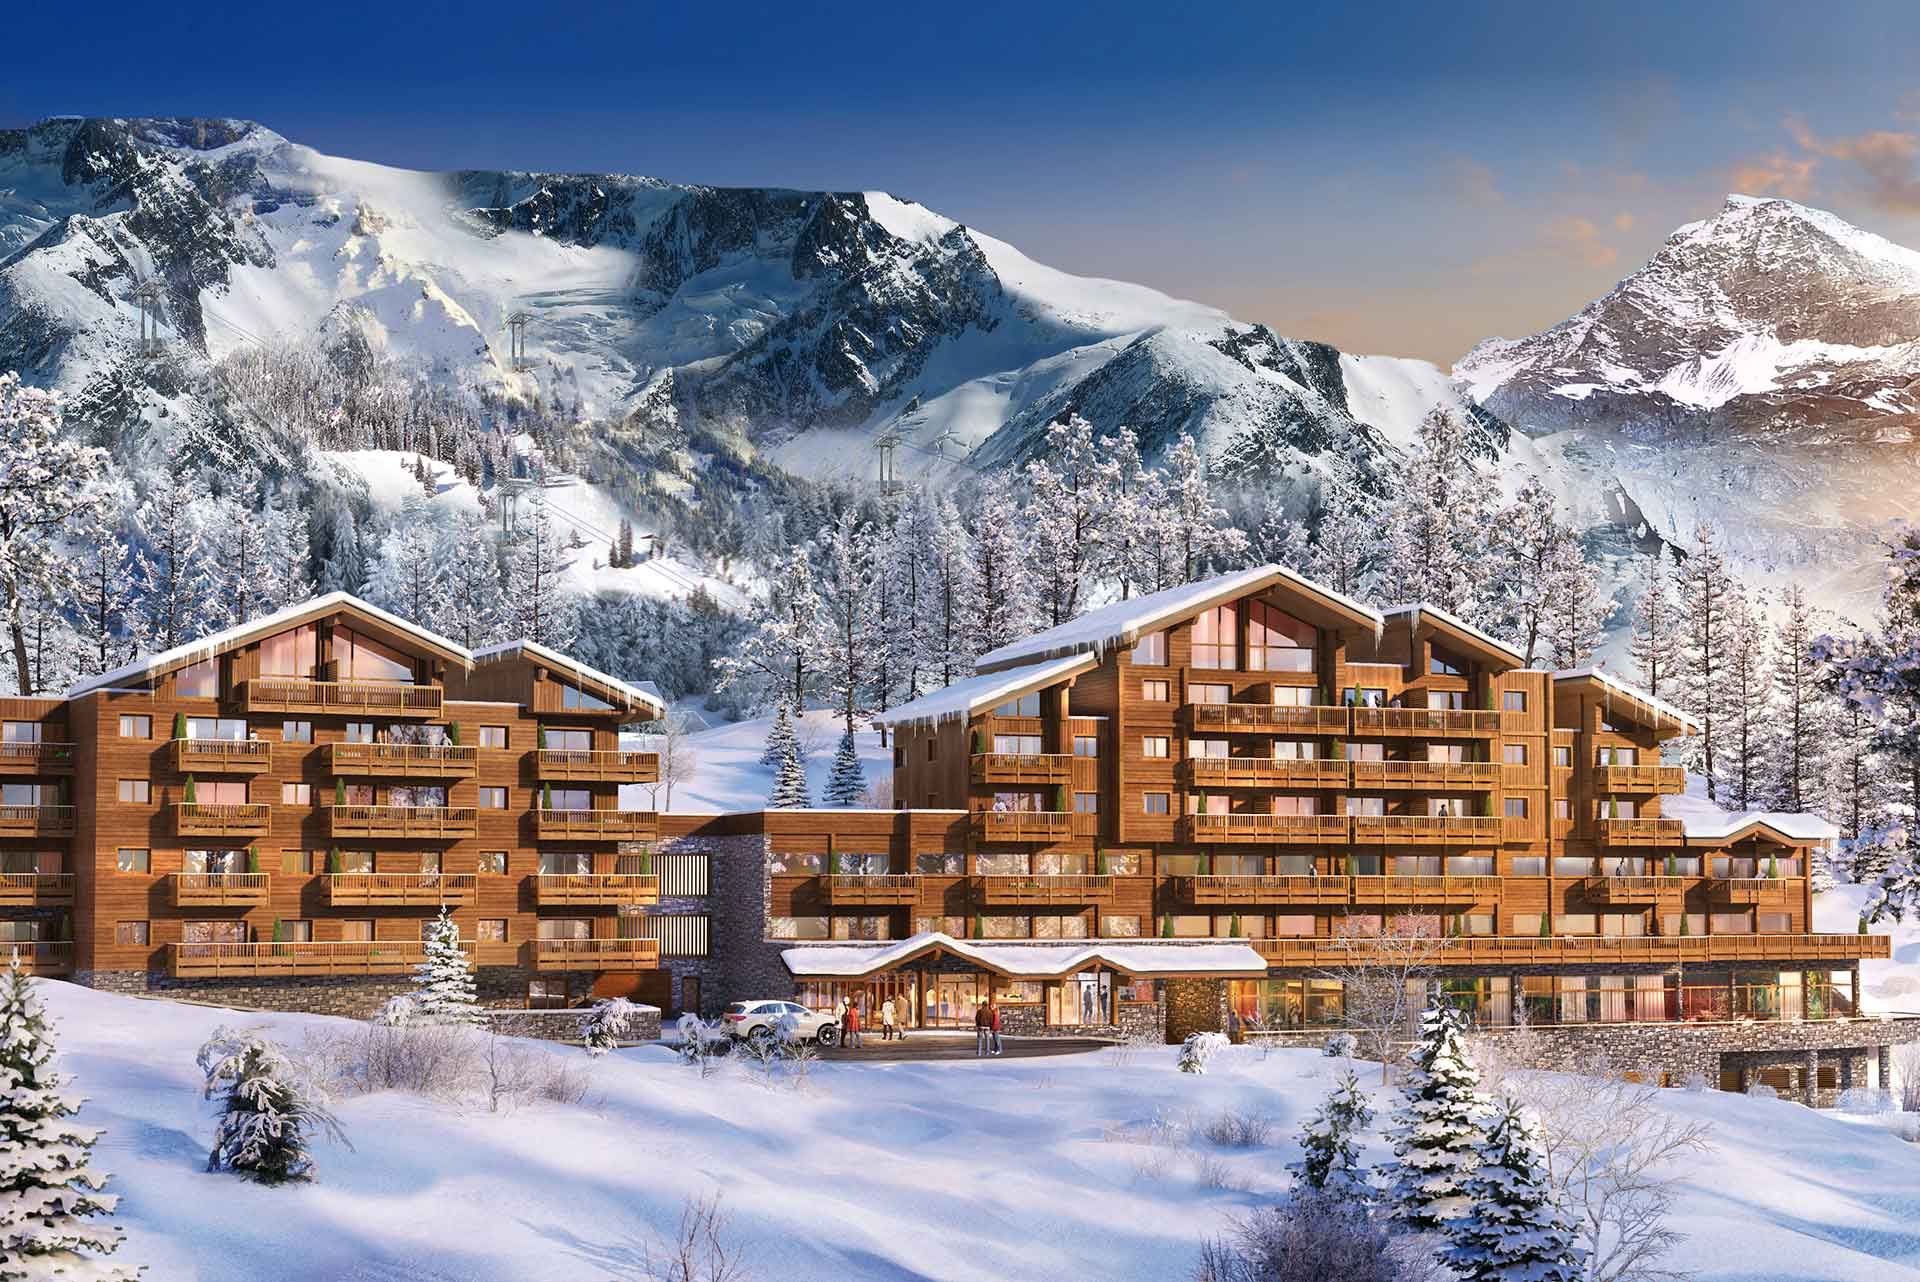 Lodge Des Neiges Tignes 1800 Property To Buy Ski Collection